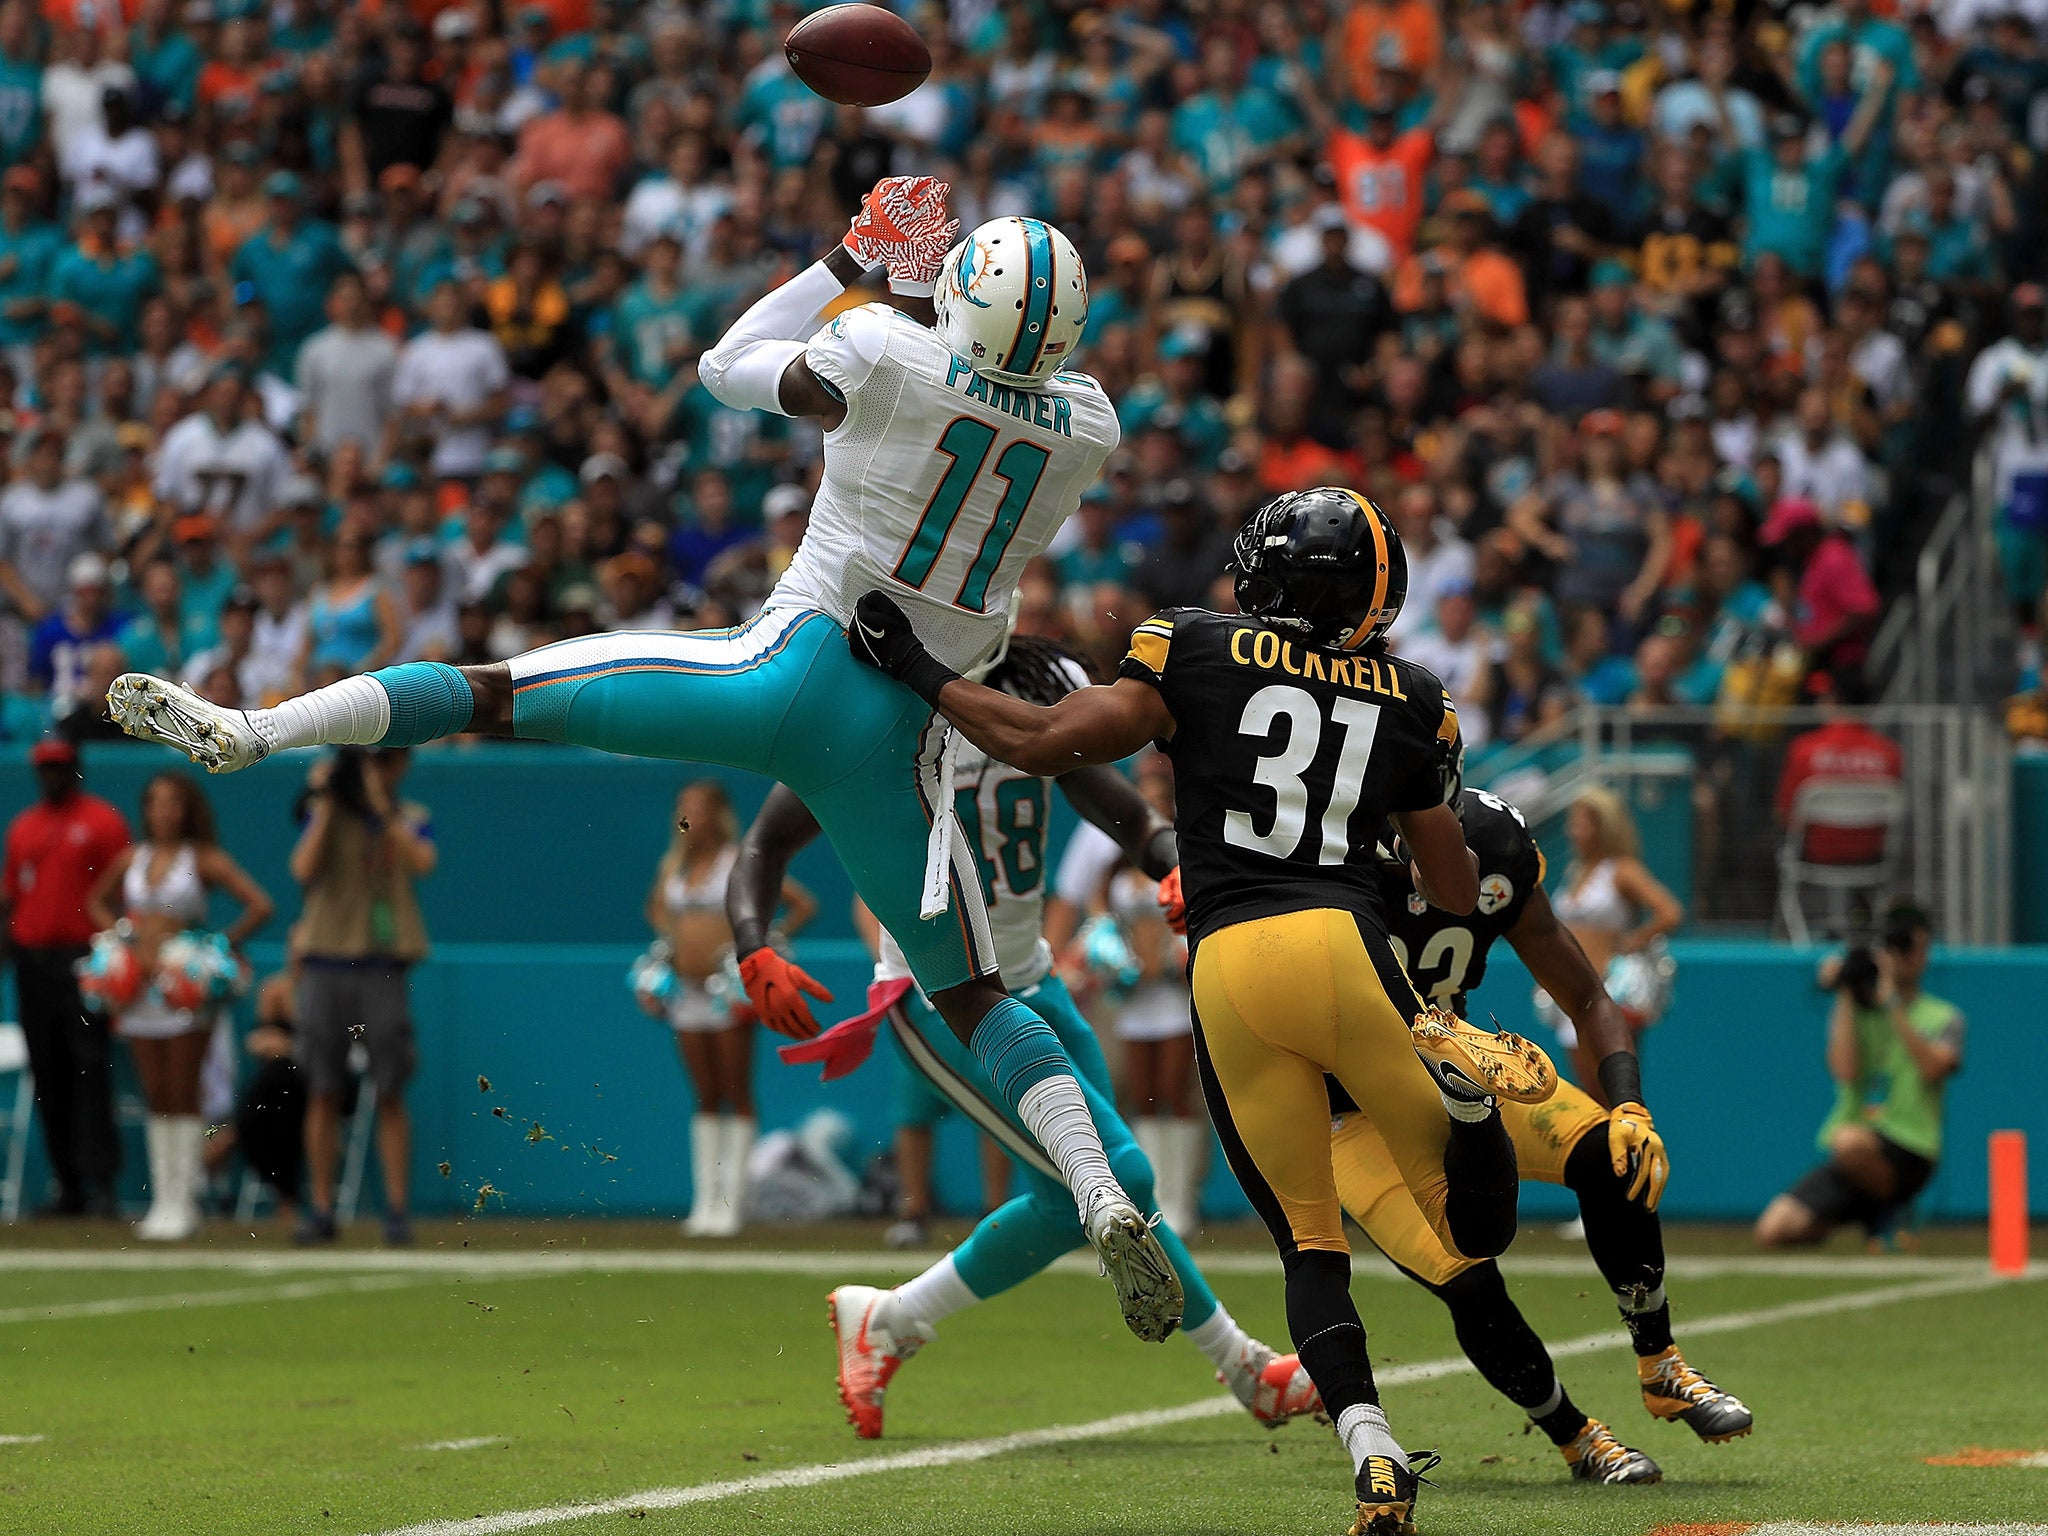 DeVante Parker leaps for a catch during the Miami Dolphins' victory over the Pittsburgh Steelers